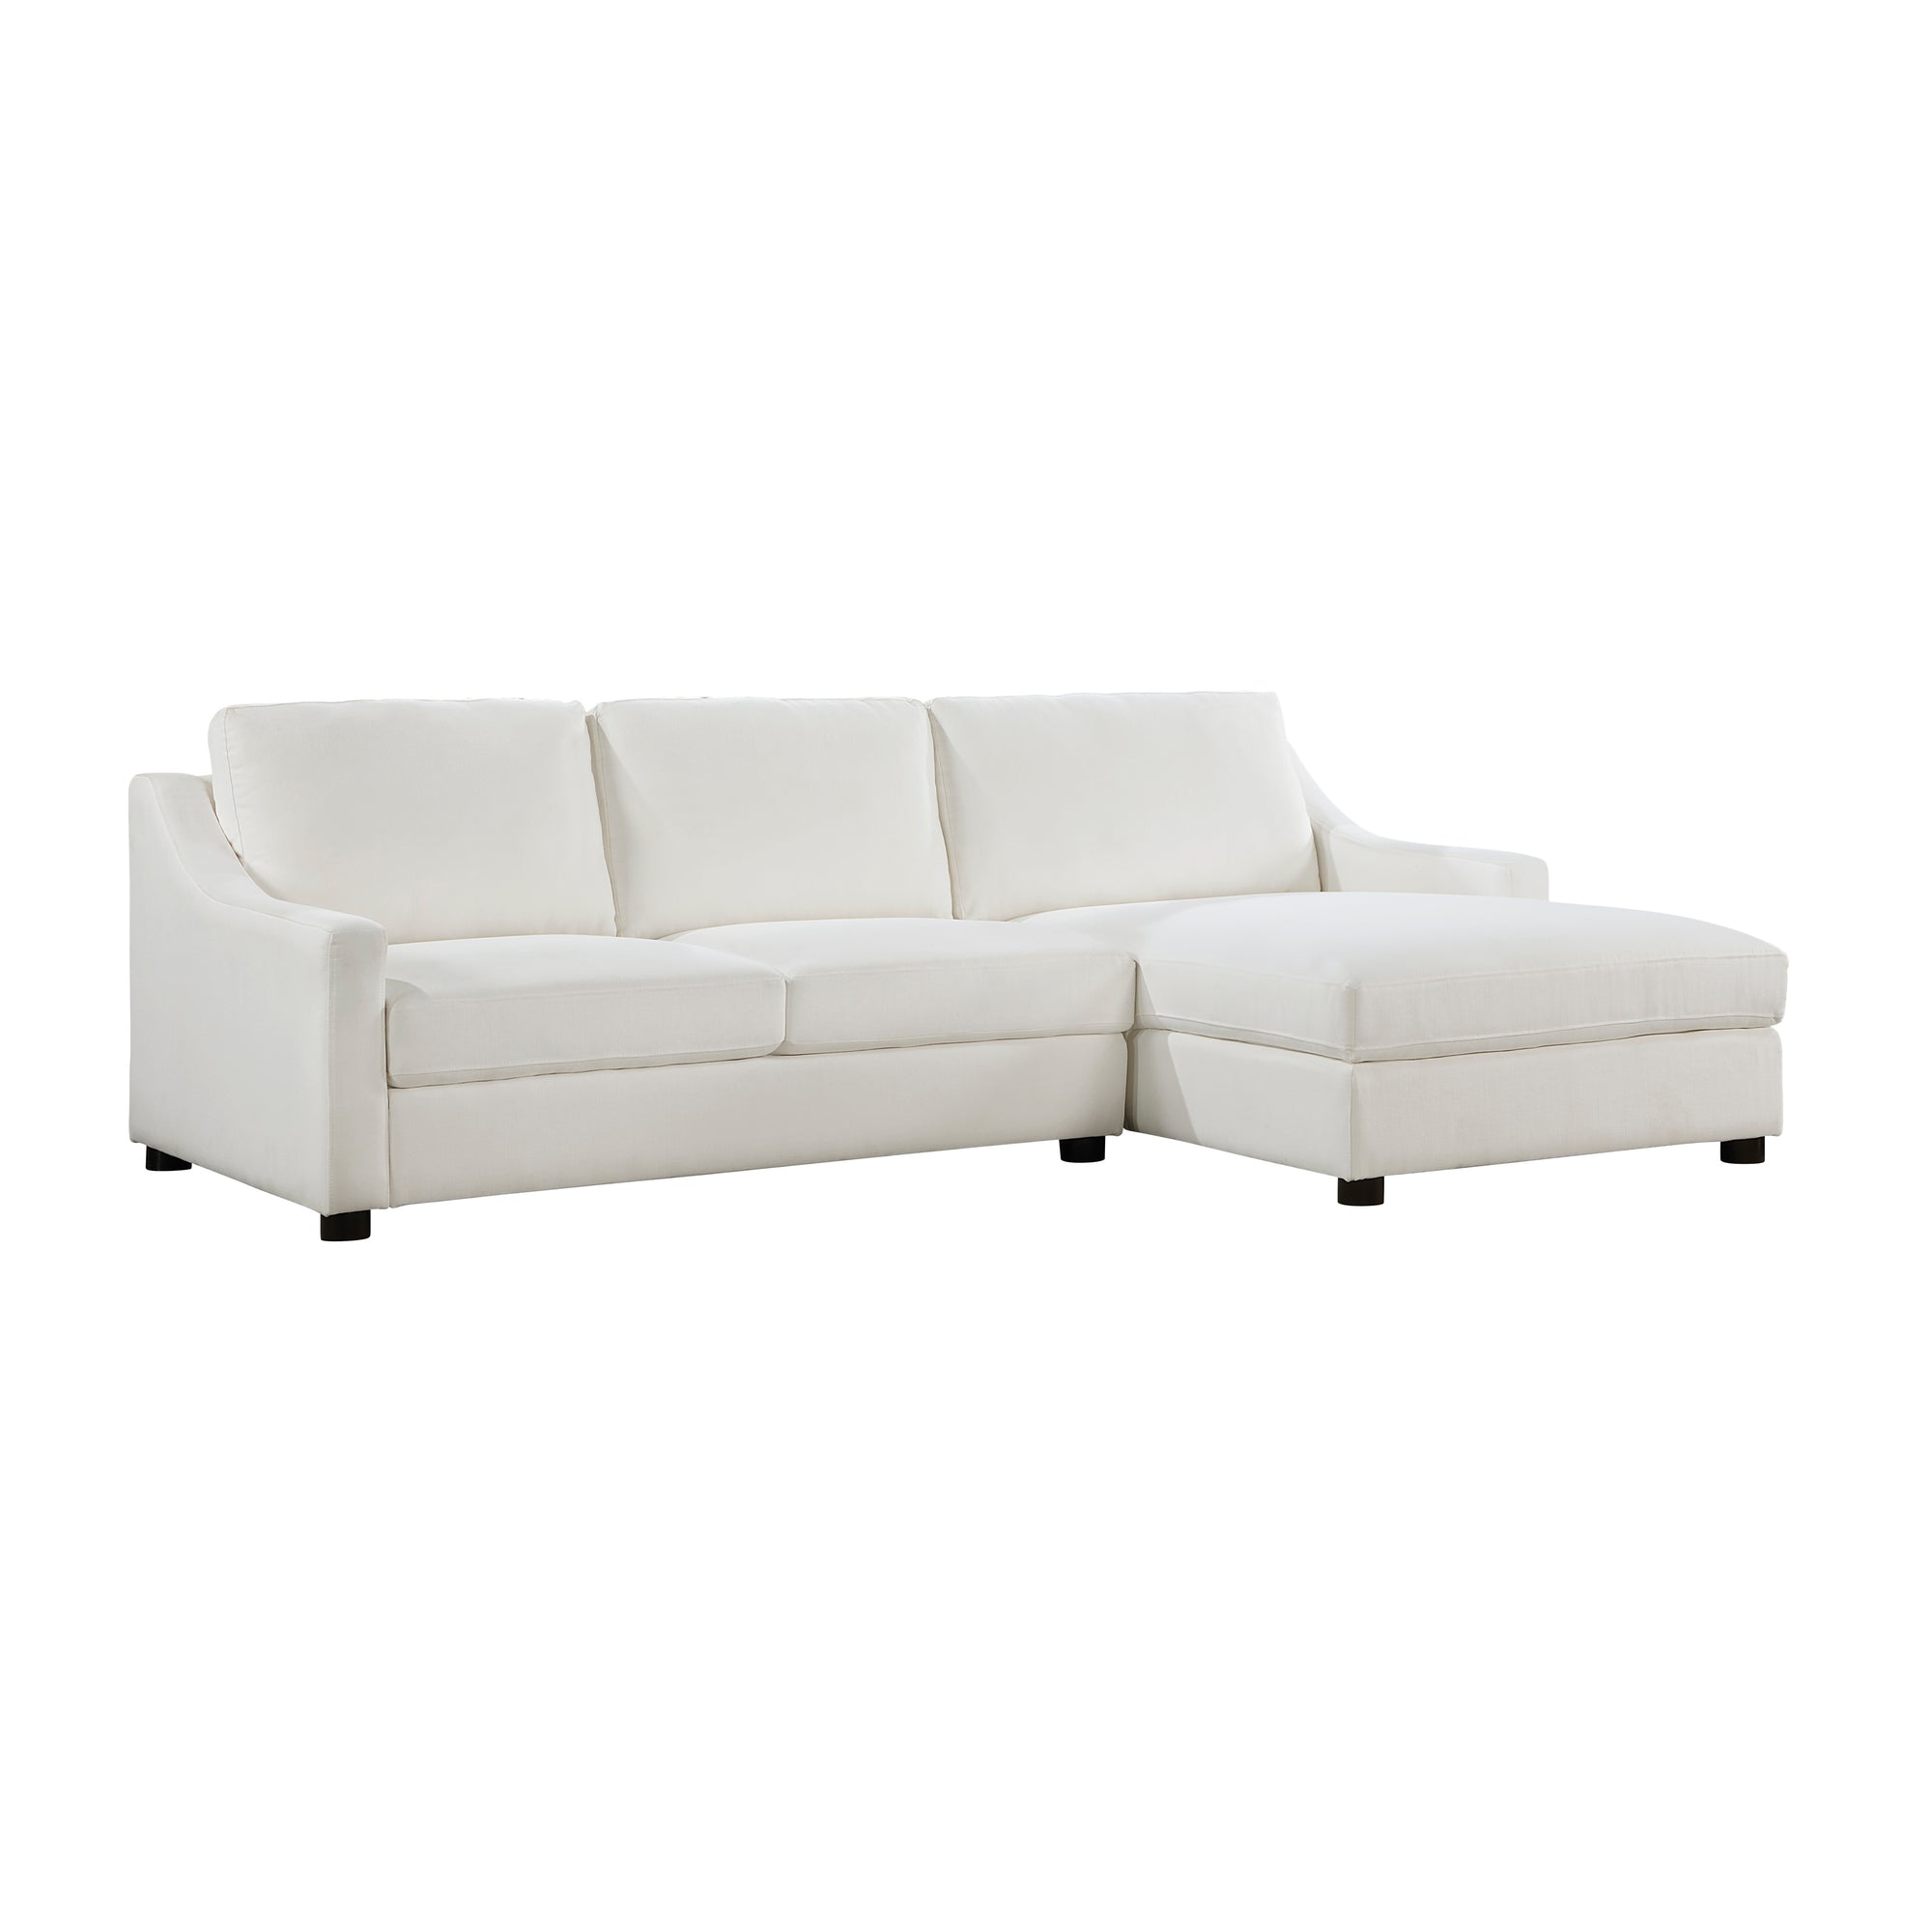 Hanna 2-Piece Sectional Sofa with Right Chaise